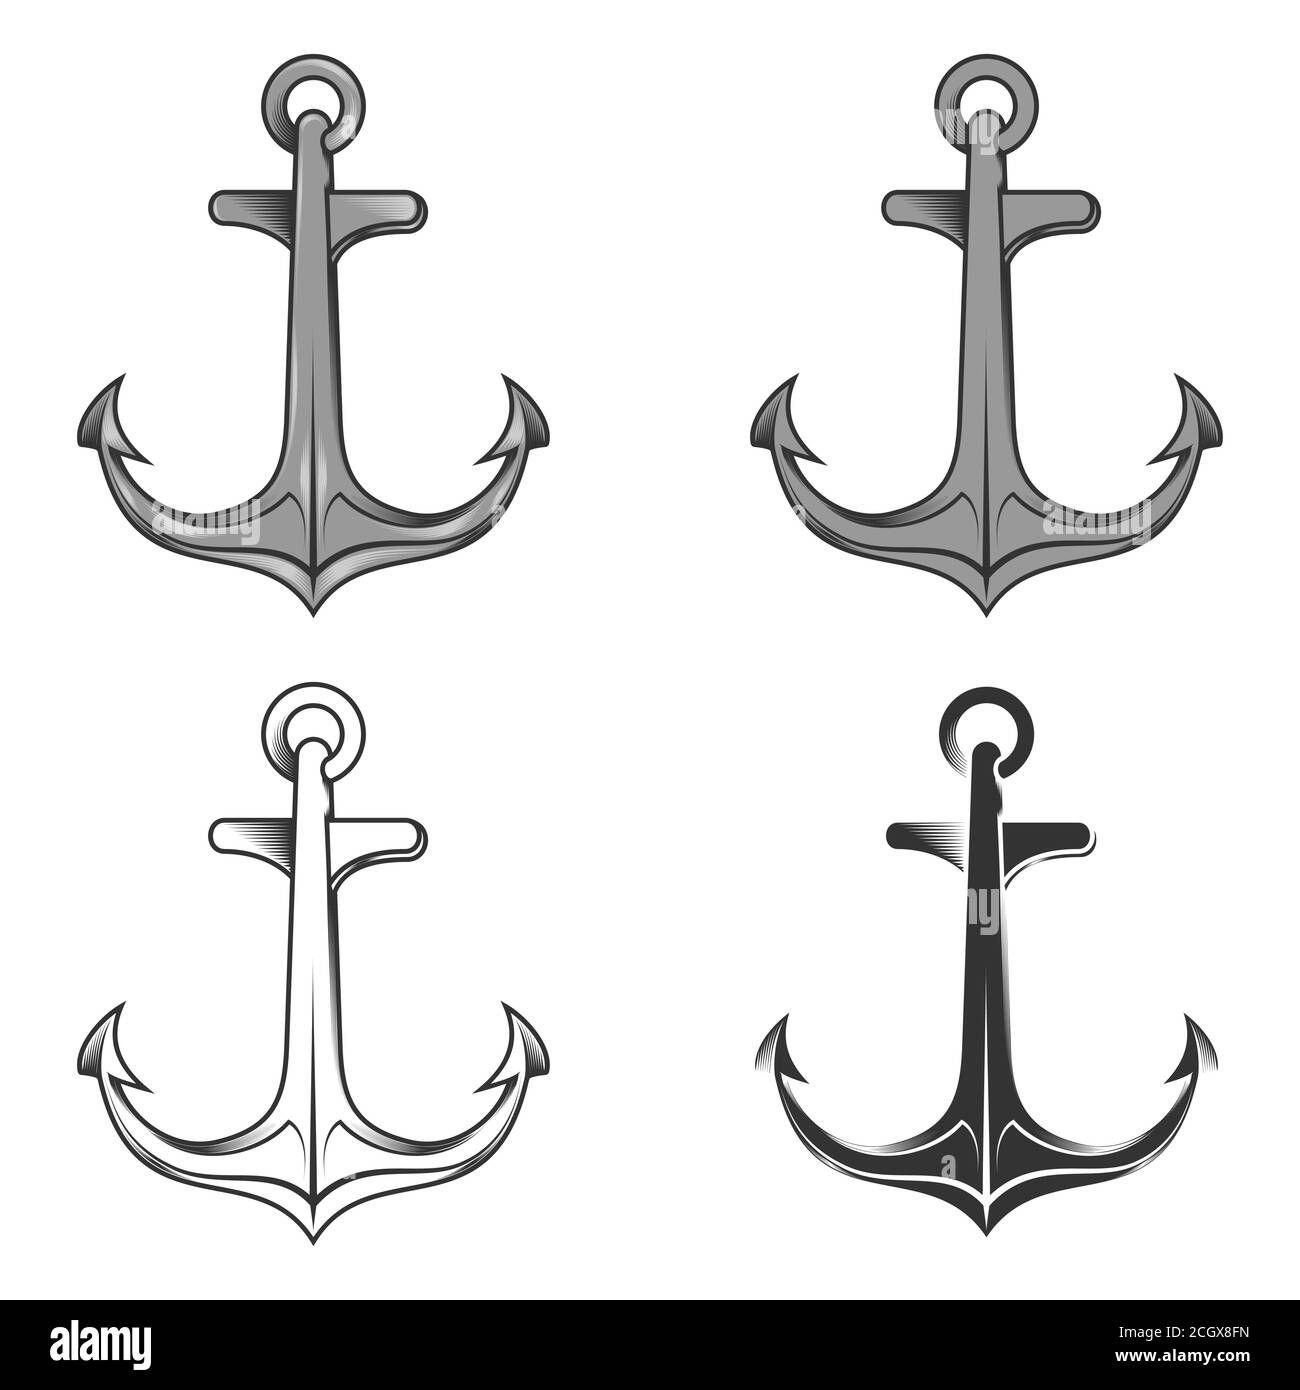 Boat anchor vector illustration in four different styles, on white background Stock Vector